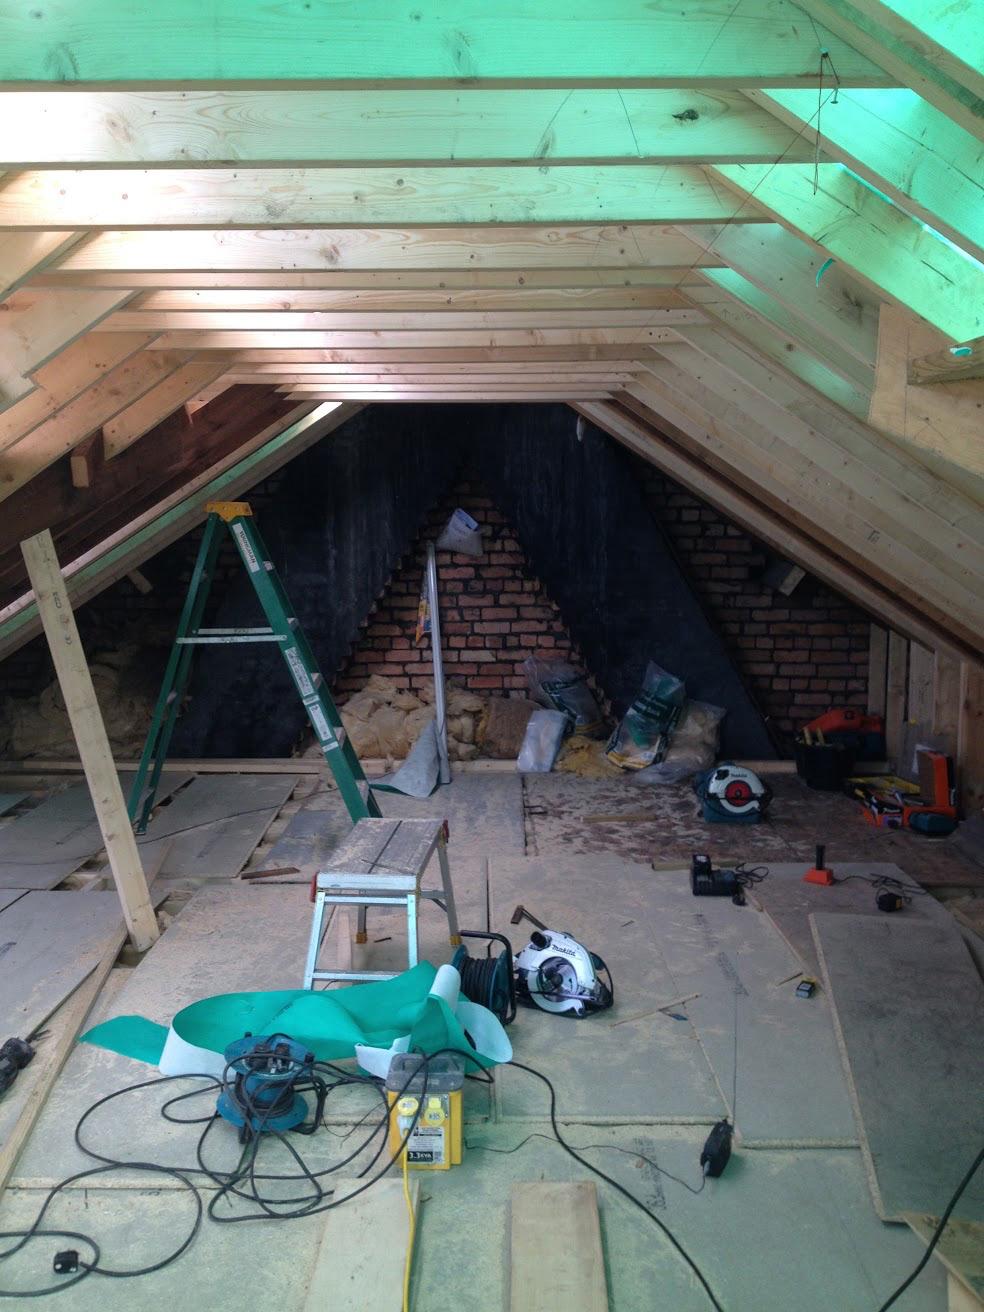 FIXTURES, FITTINGS, FURNISHINGS & FINISHINGS We often get asked how much different elements of a loft conversion would be.